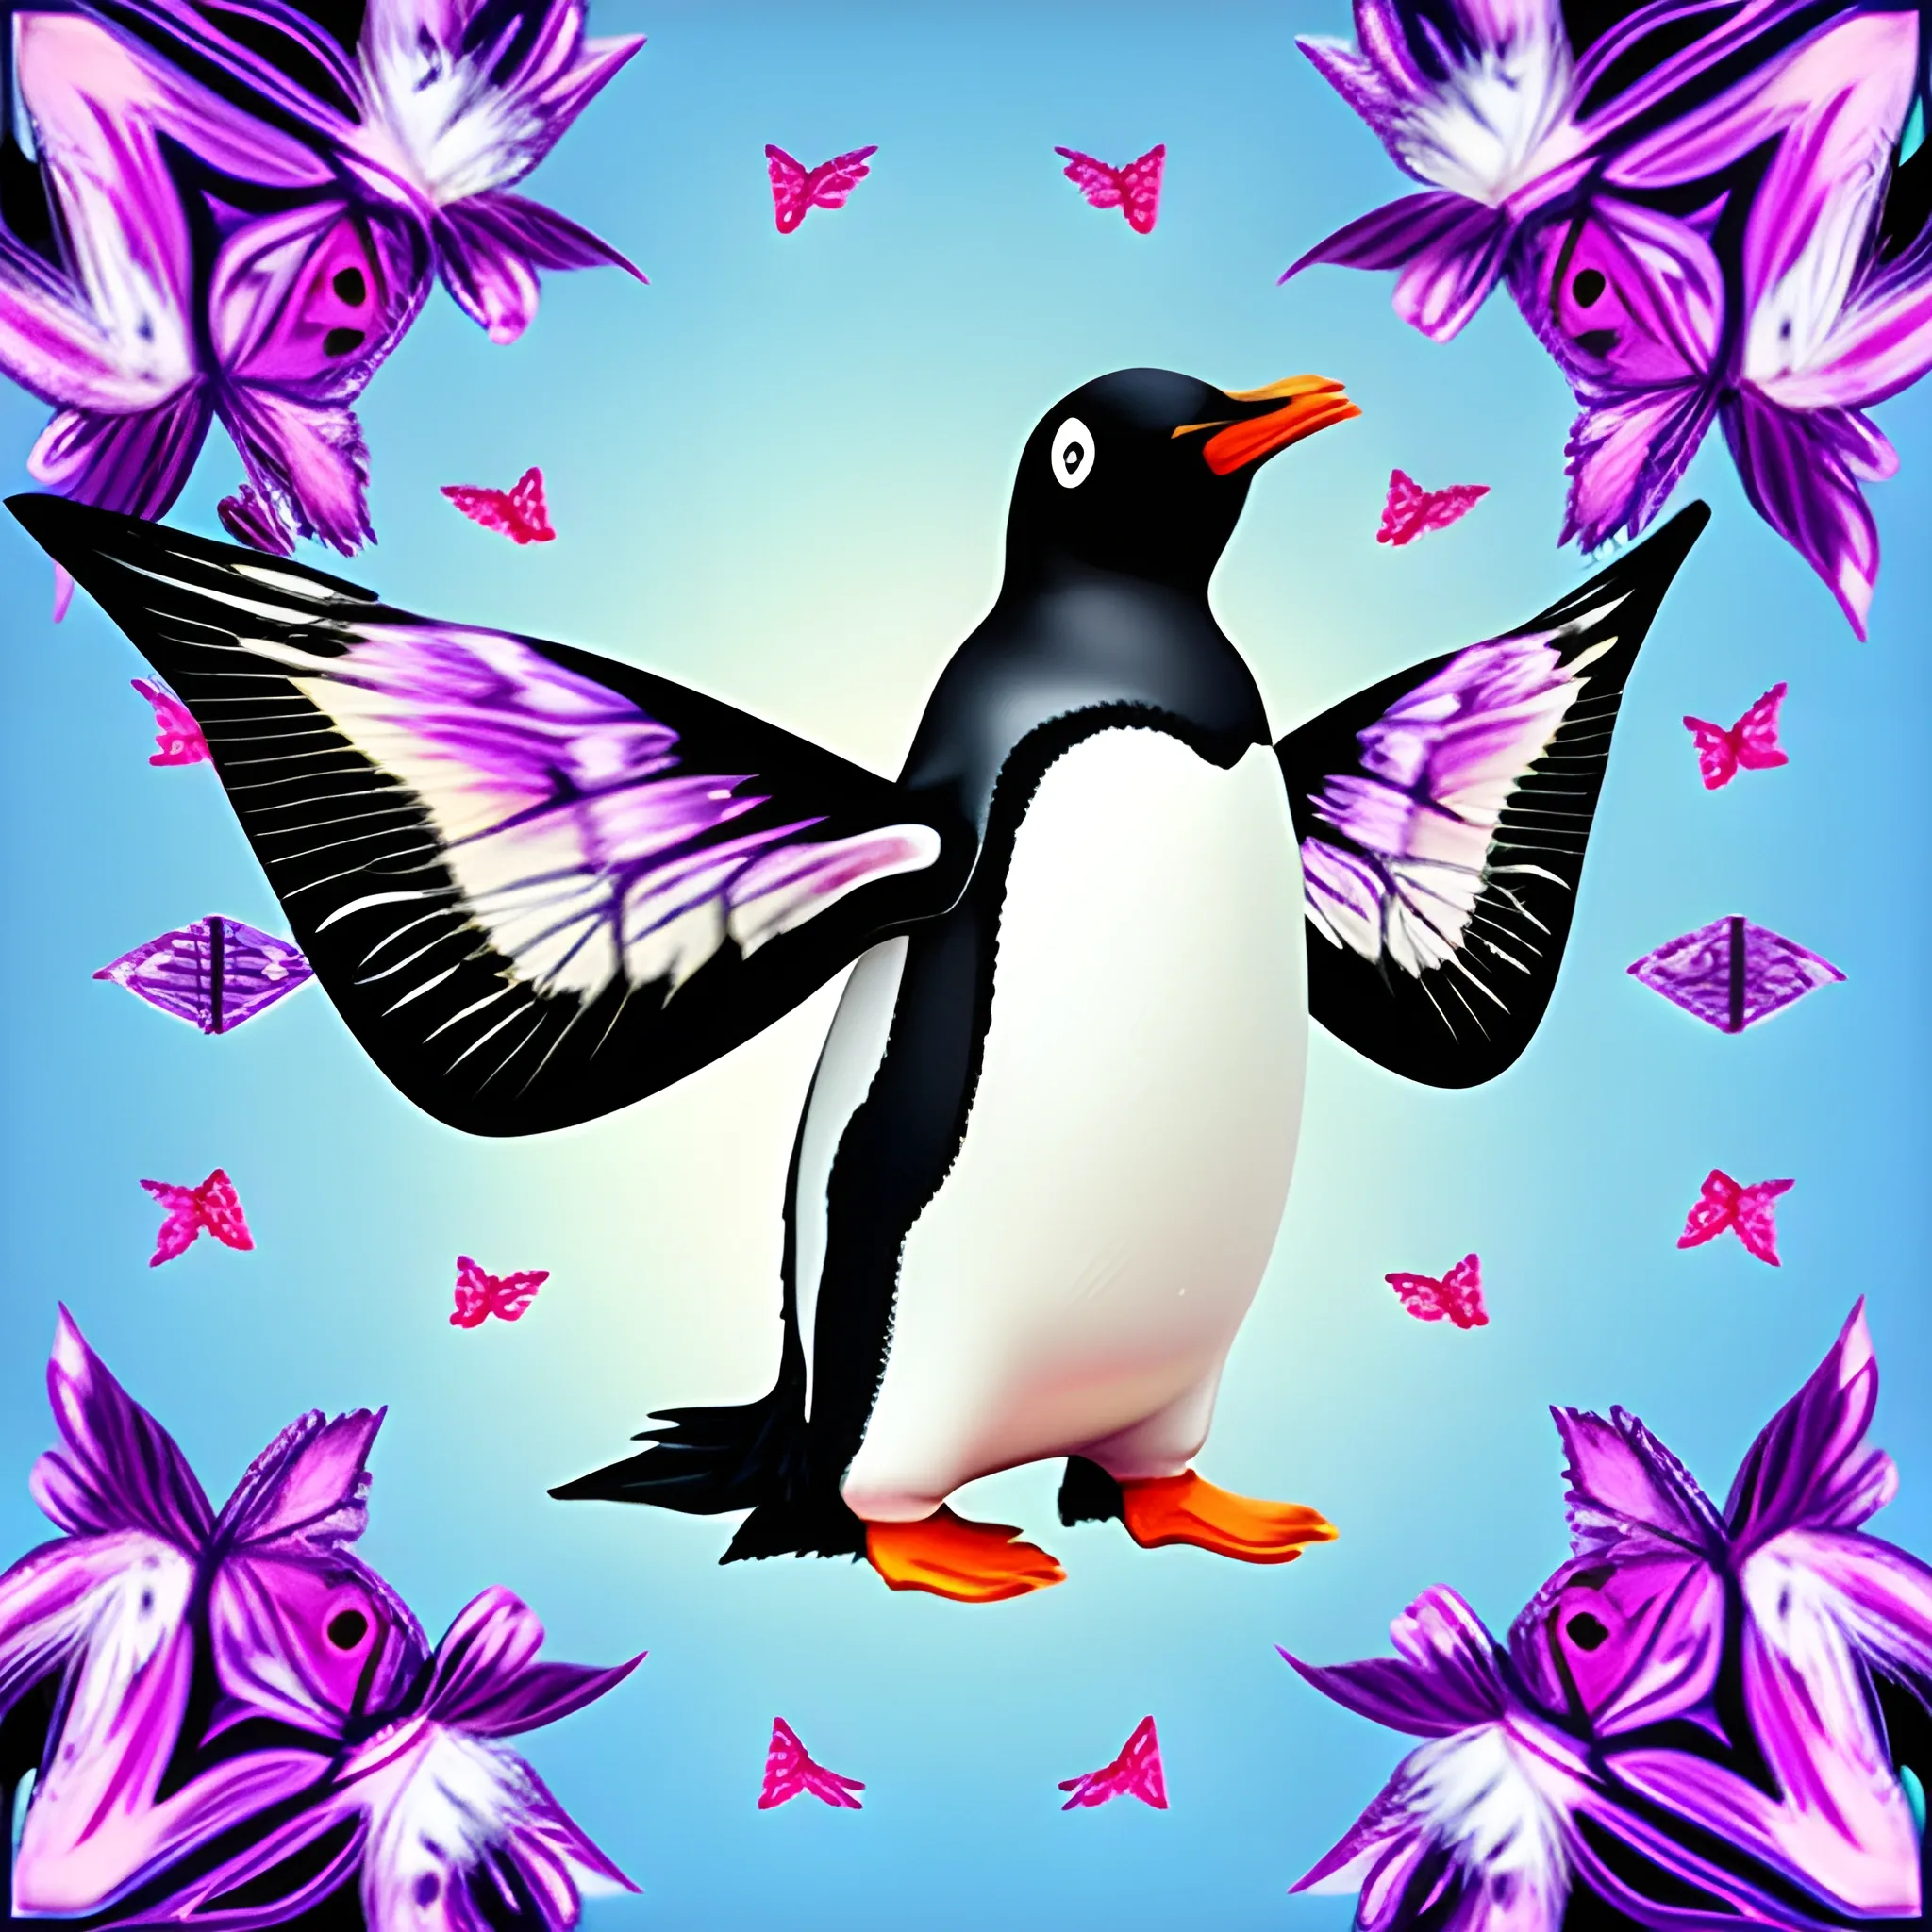 penguin with wings of butterfly, Trippy